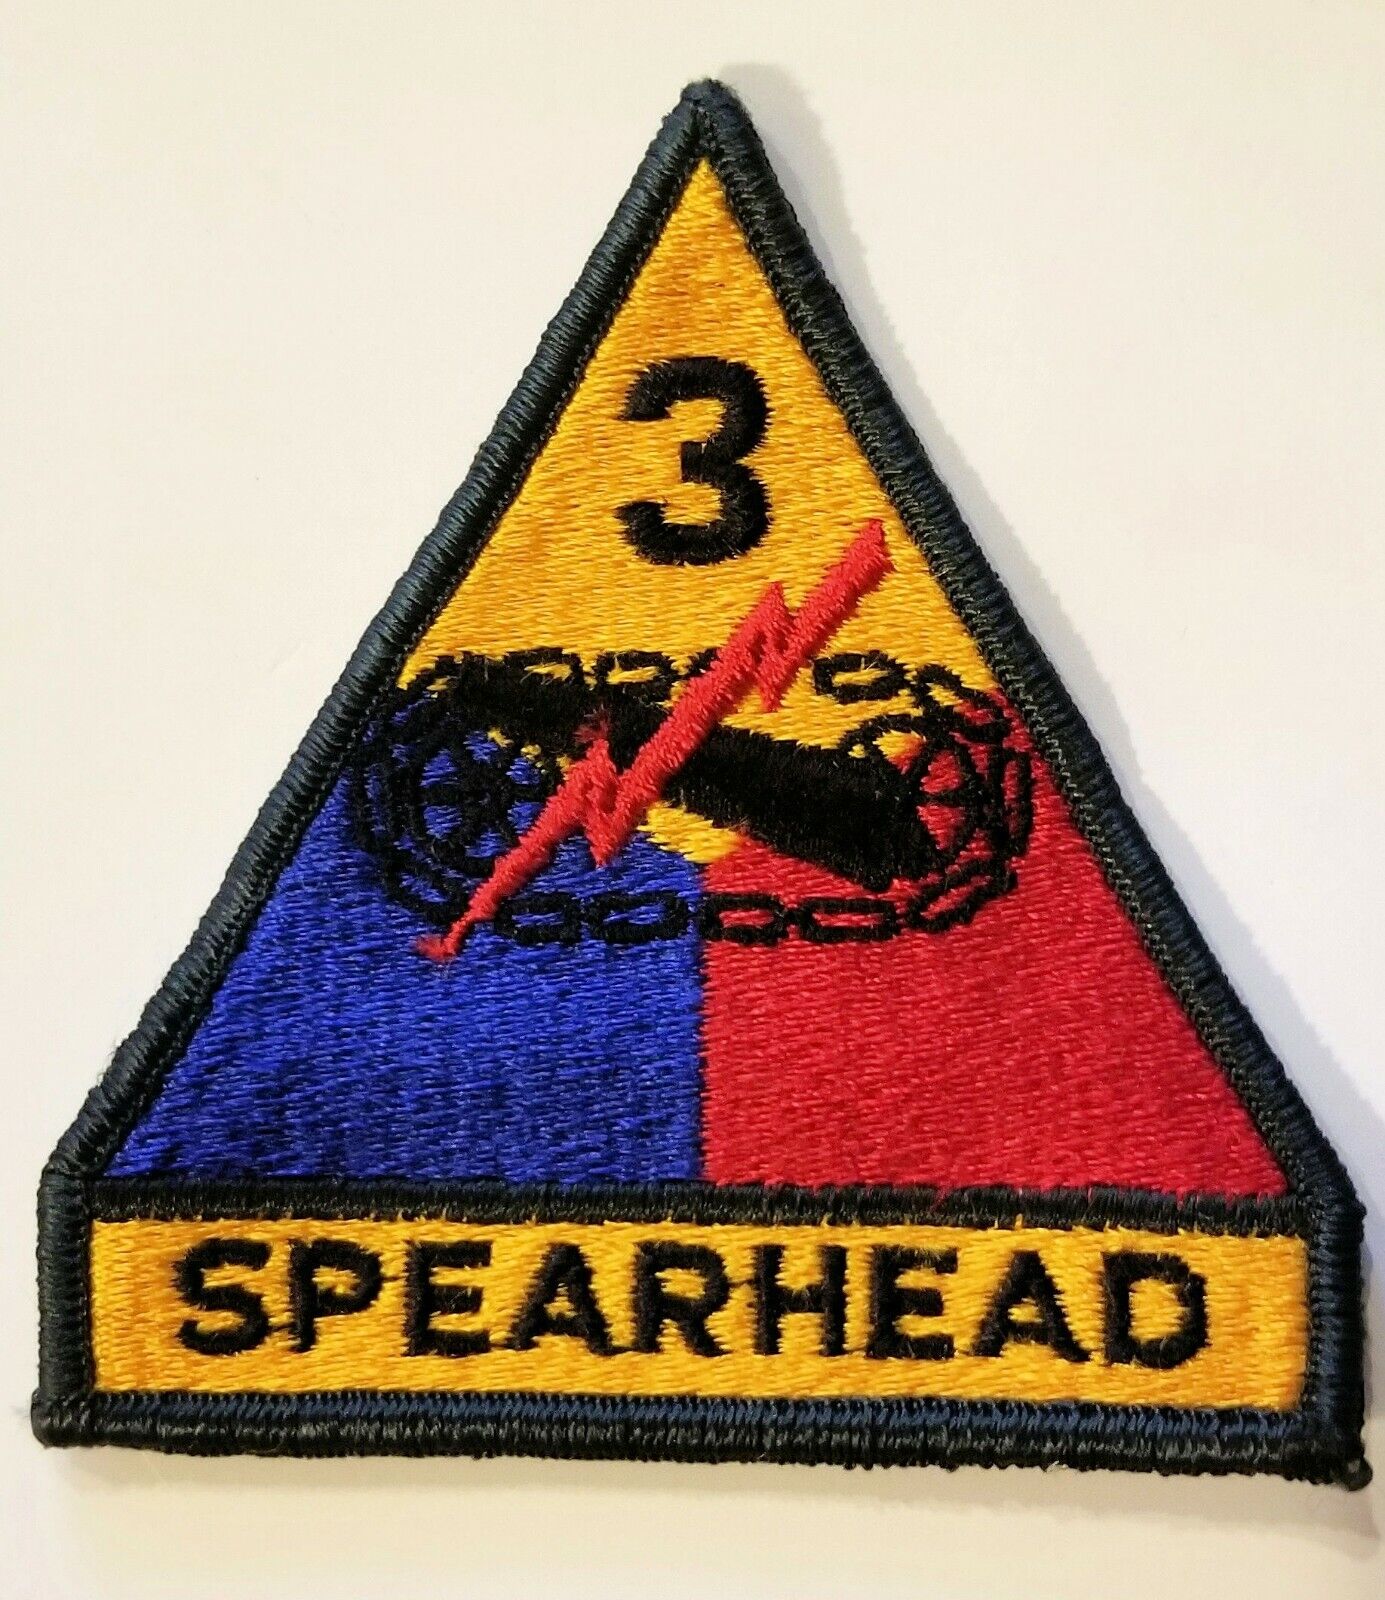 US ARMY 3RD ARMORED DIVISION SPEARHEAD USGI US GOVERNMENT ISSUE PATCH